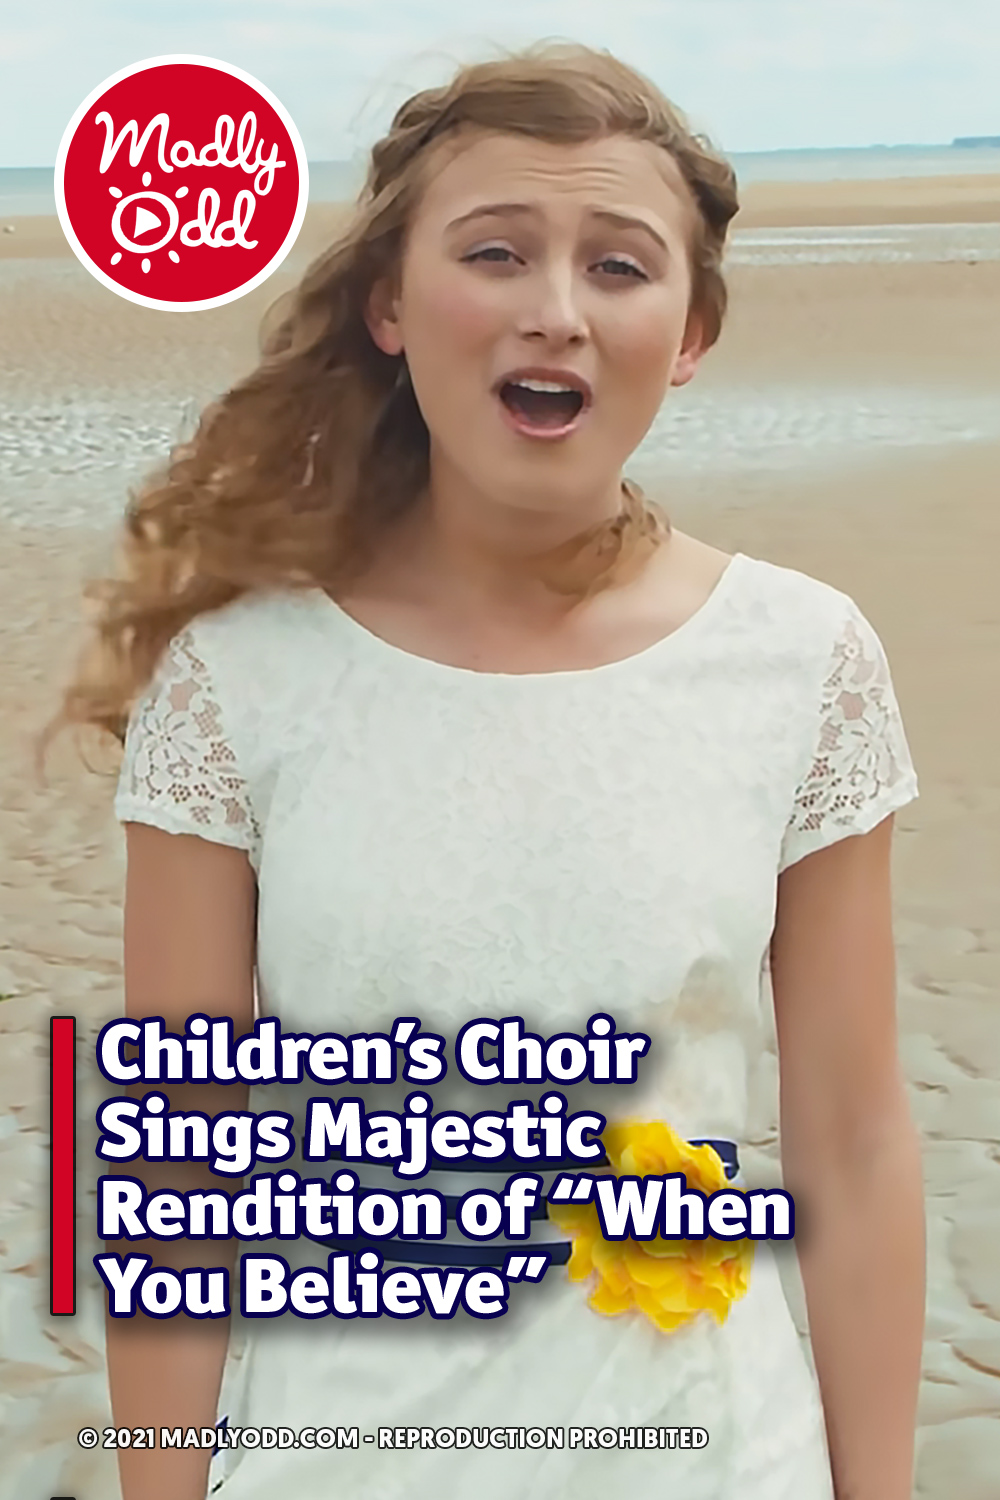 Children’s Choir Sings Majestic Rendition of “When You Believe”